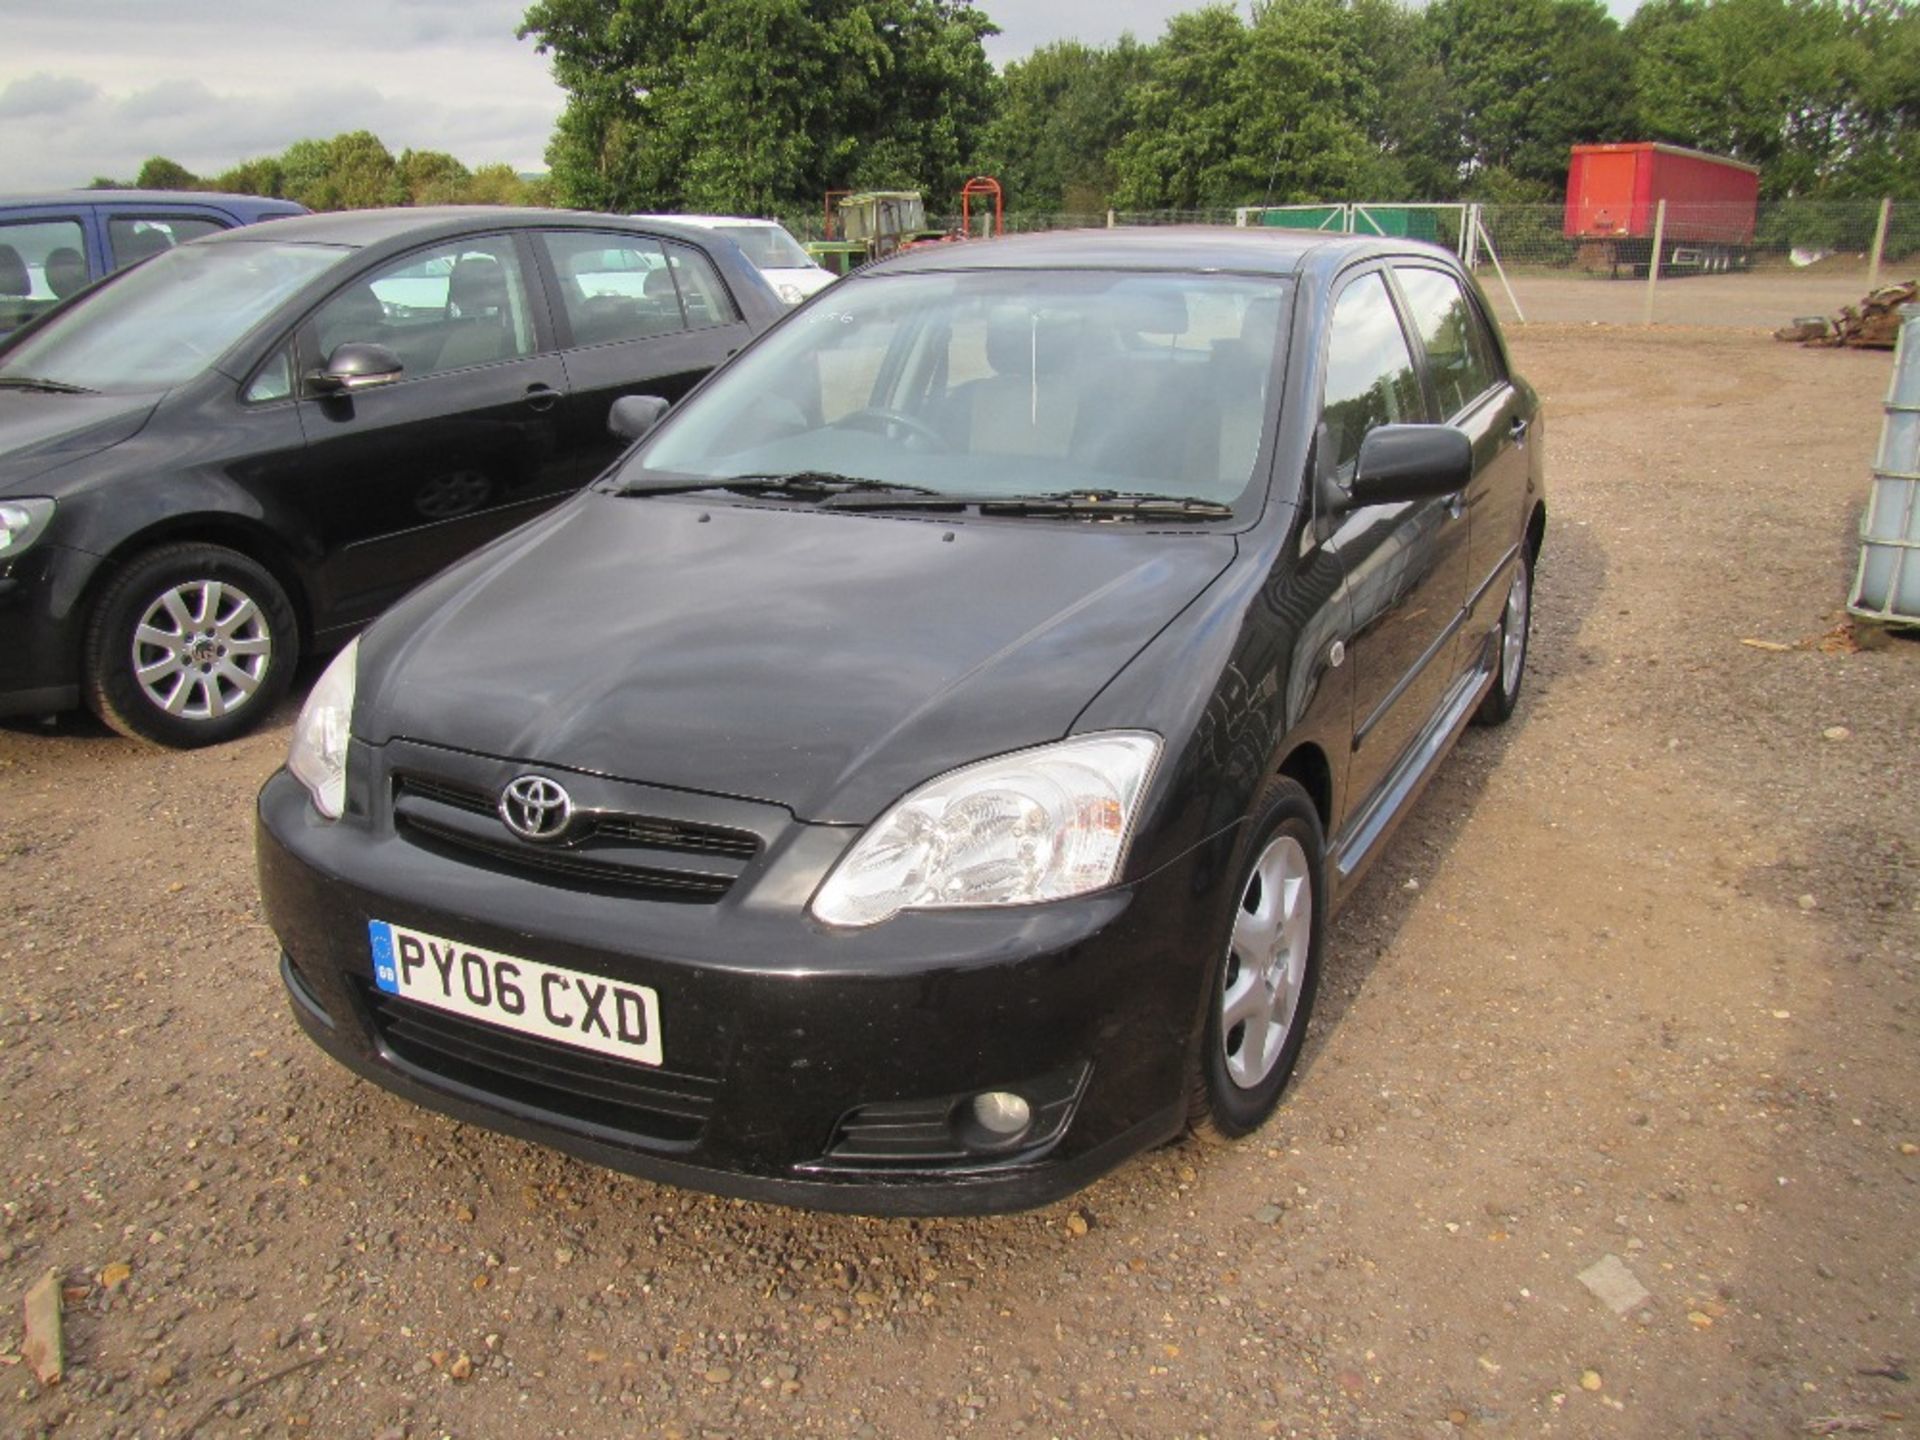 2006 Toyota Corrola 1.6 Litre Petrol. One Owner. Full Service History. 3 keys supplied. V5 will be